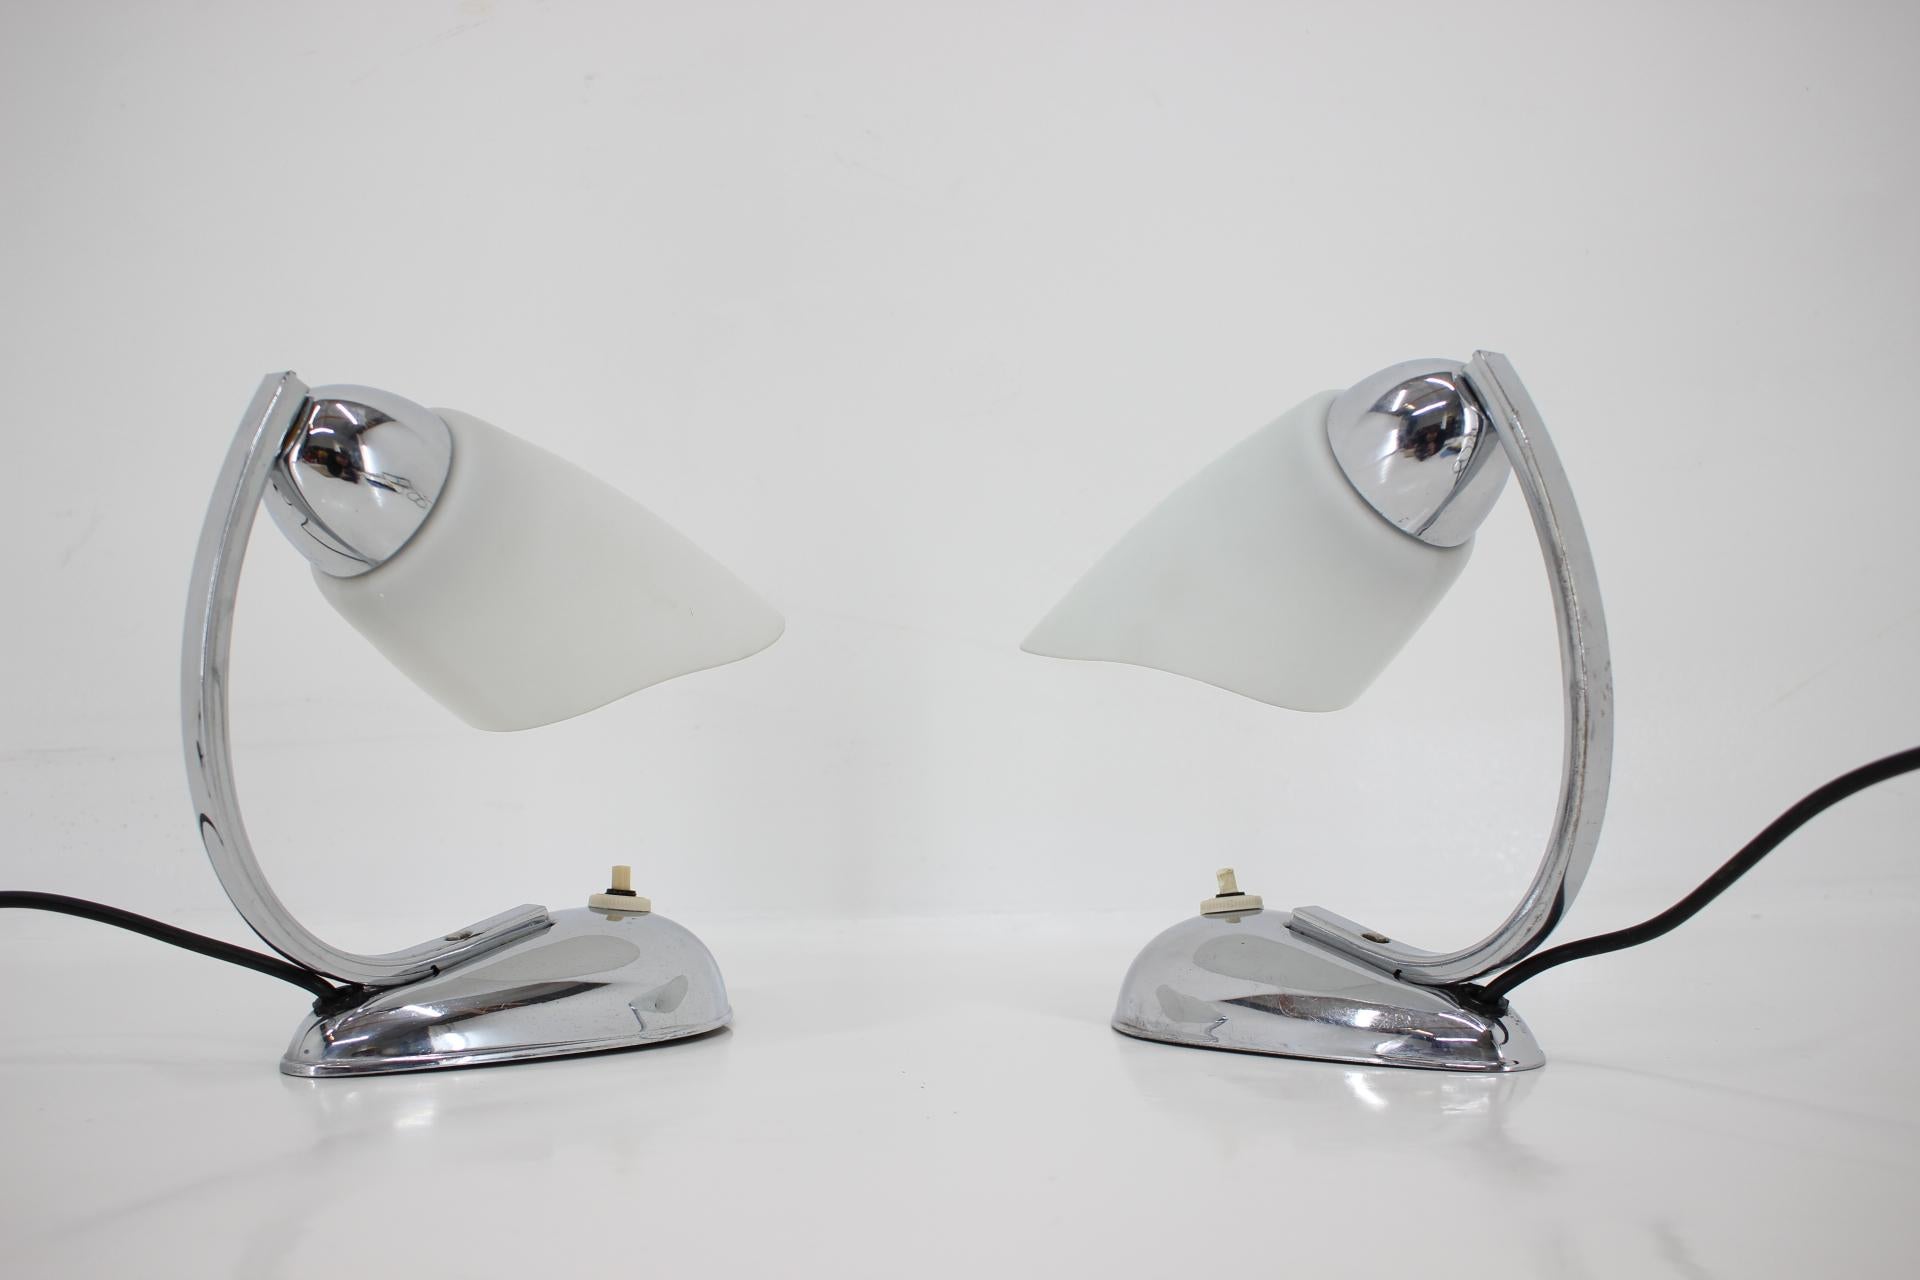 Mid-Century Modern Pair of Chrome Glass Design Midcentury Table Lamps, 1950s For Sale